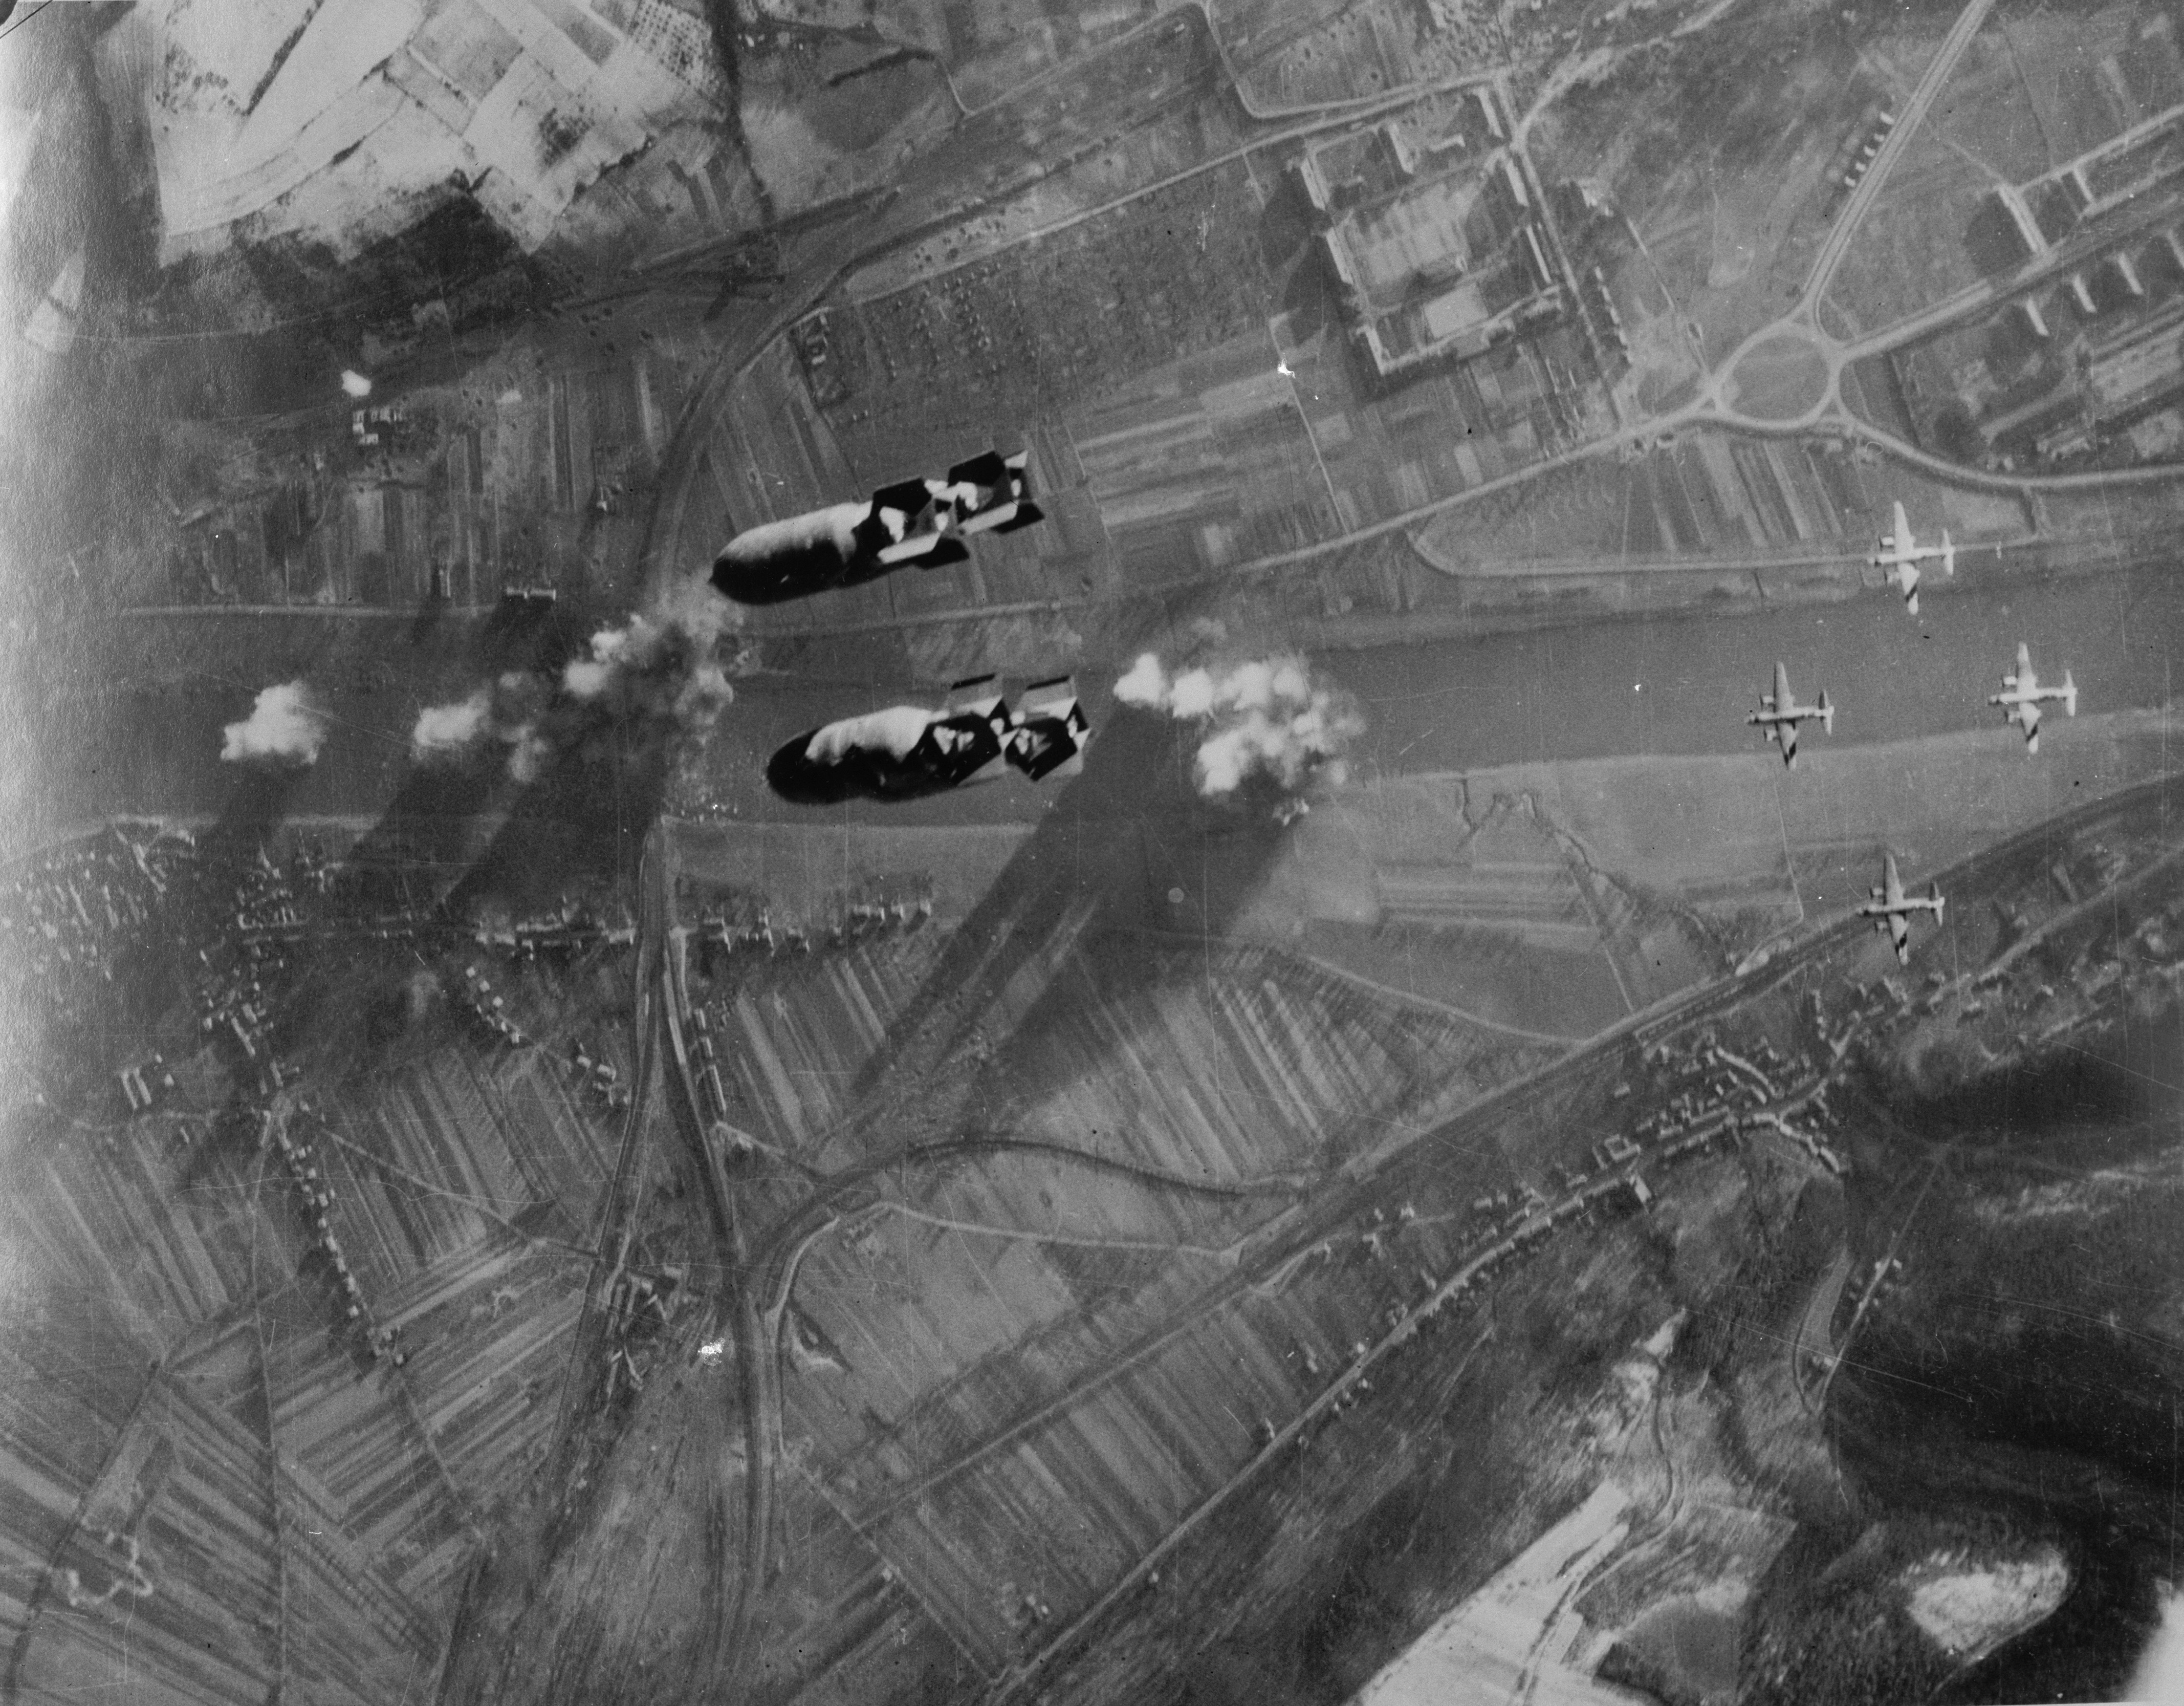 Bomb bay view of Martin B-26 Marauder bombers of the 323rd and 394th Bomb Groups drop 122 tons of bombs in an effort to take down the railroad bridge across the Moselle river at Trier, Germany, 24 Dec 1944.